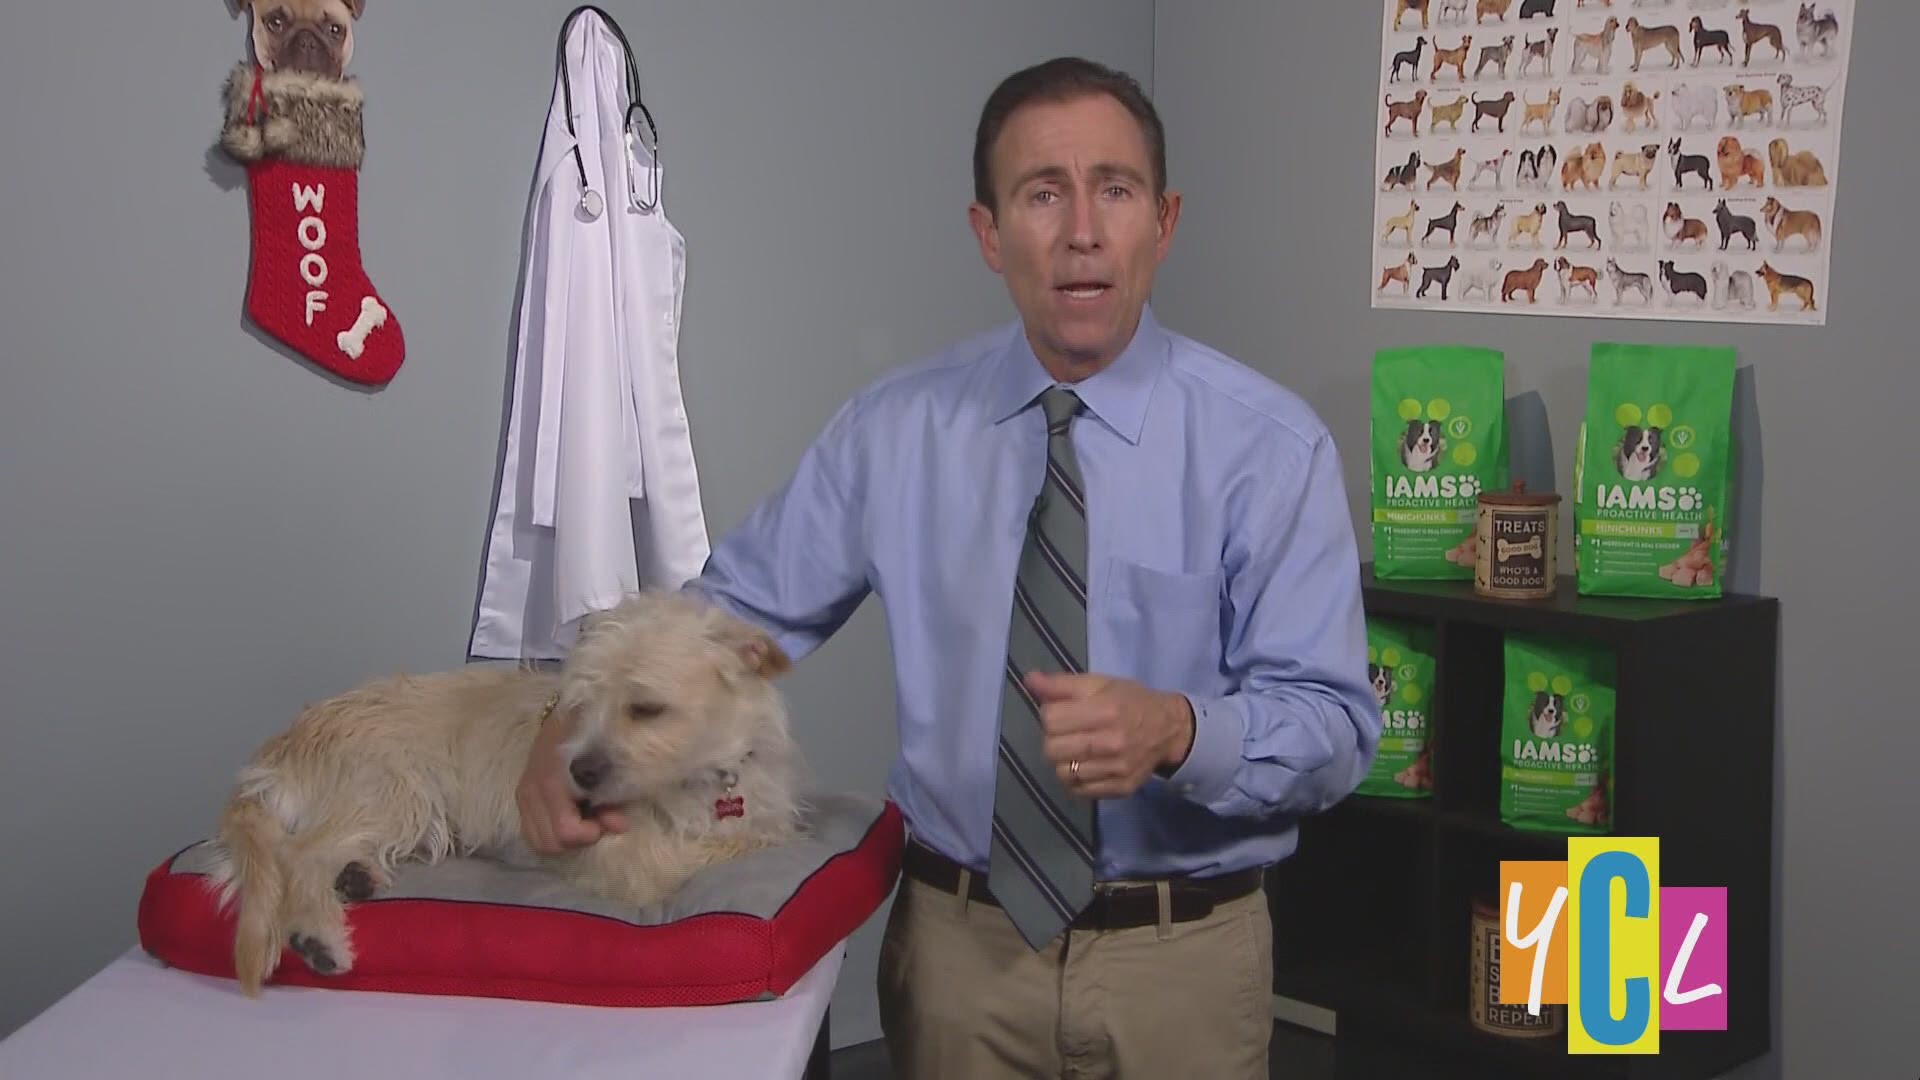 Veterinarian, Dr. Jeff Werber shares how a dog’s health can have an impact on its owner’s health. The following is a paid segment sponsored by IAMS Dog Food.